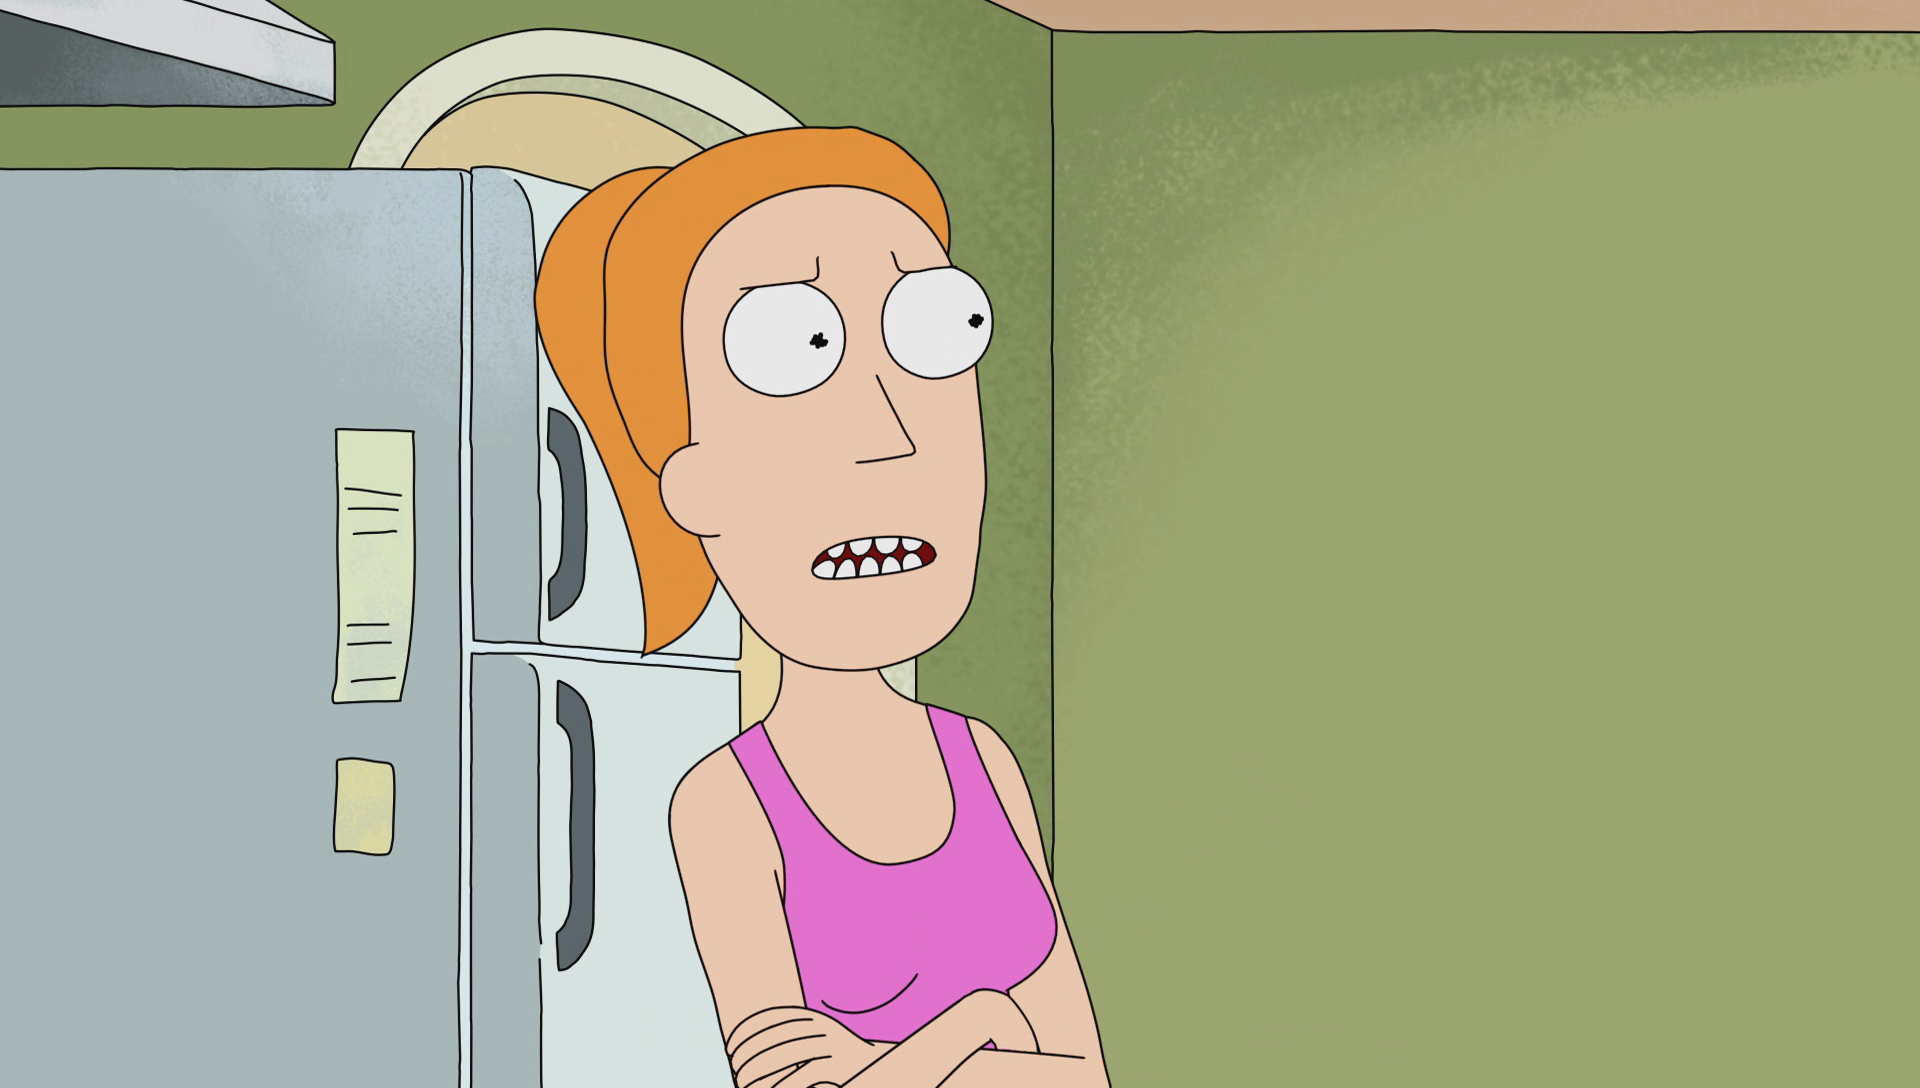 Image S1e8 Summer Smithpng Rick And Morty Wiki Fandom Powered By Wikia 3652